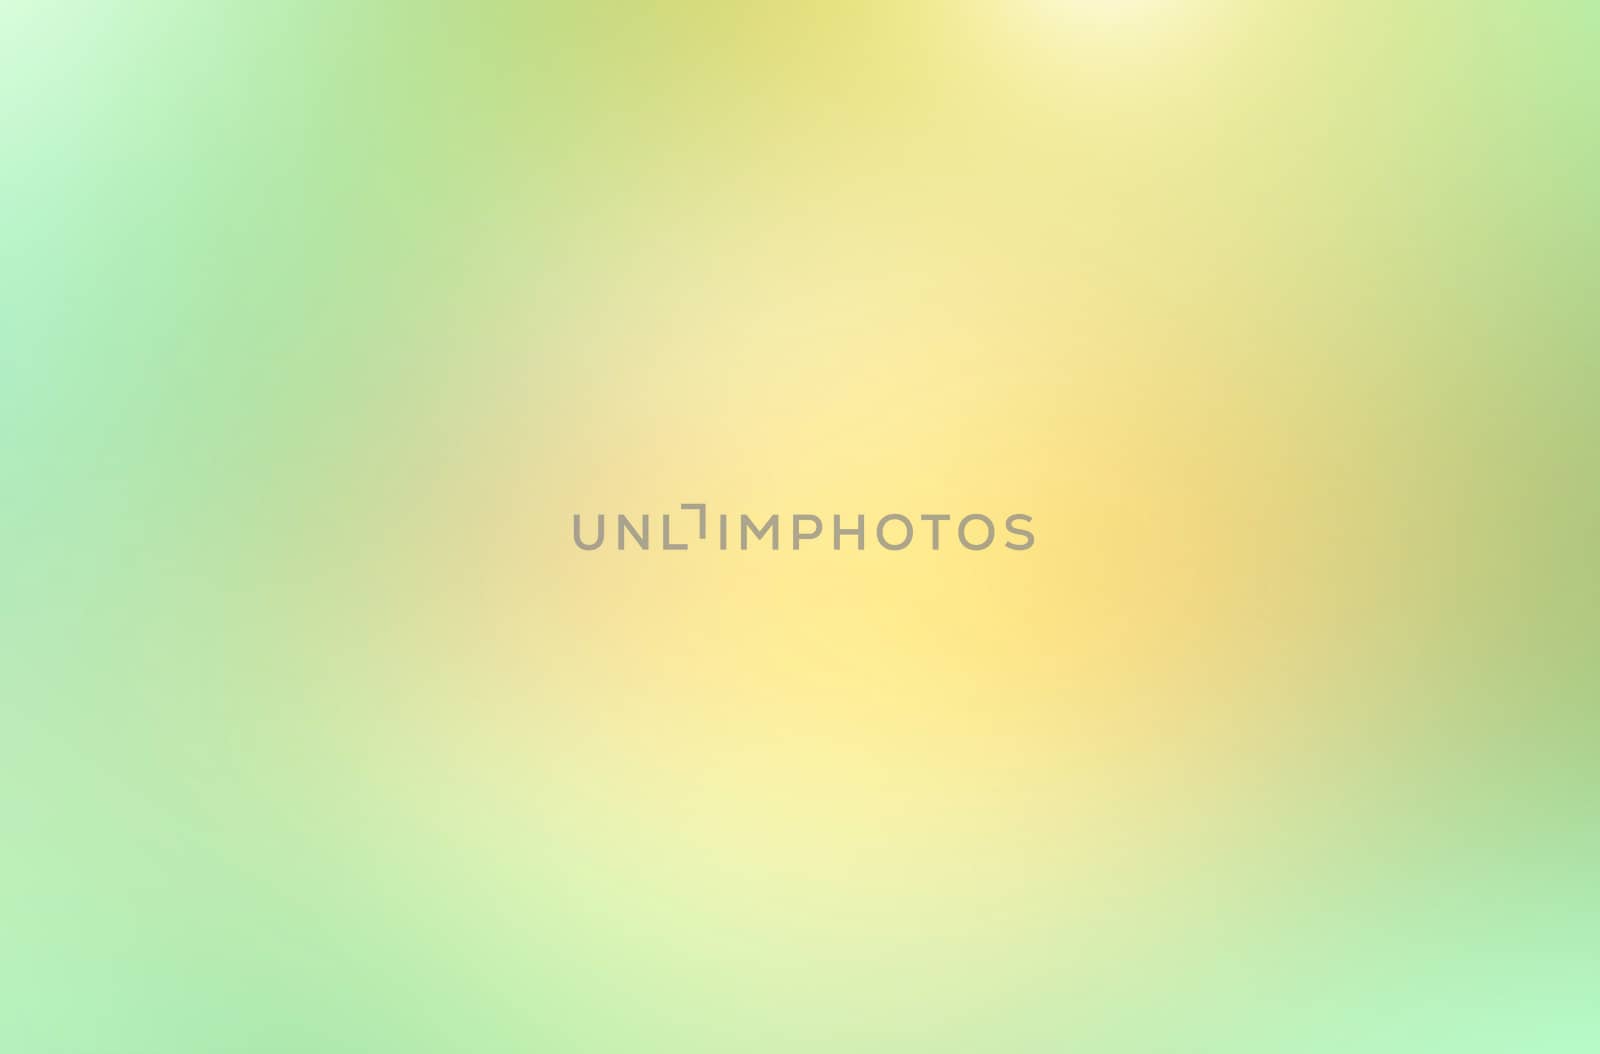 Abstract Blurred green and yellow gradient background, for your mockup and template design.